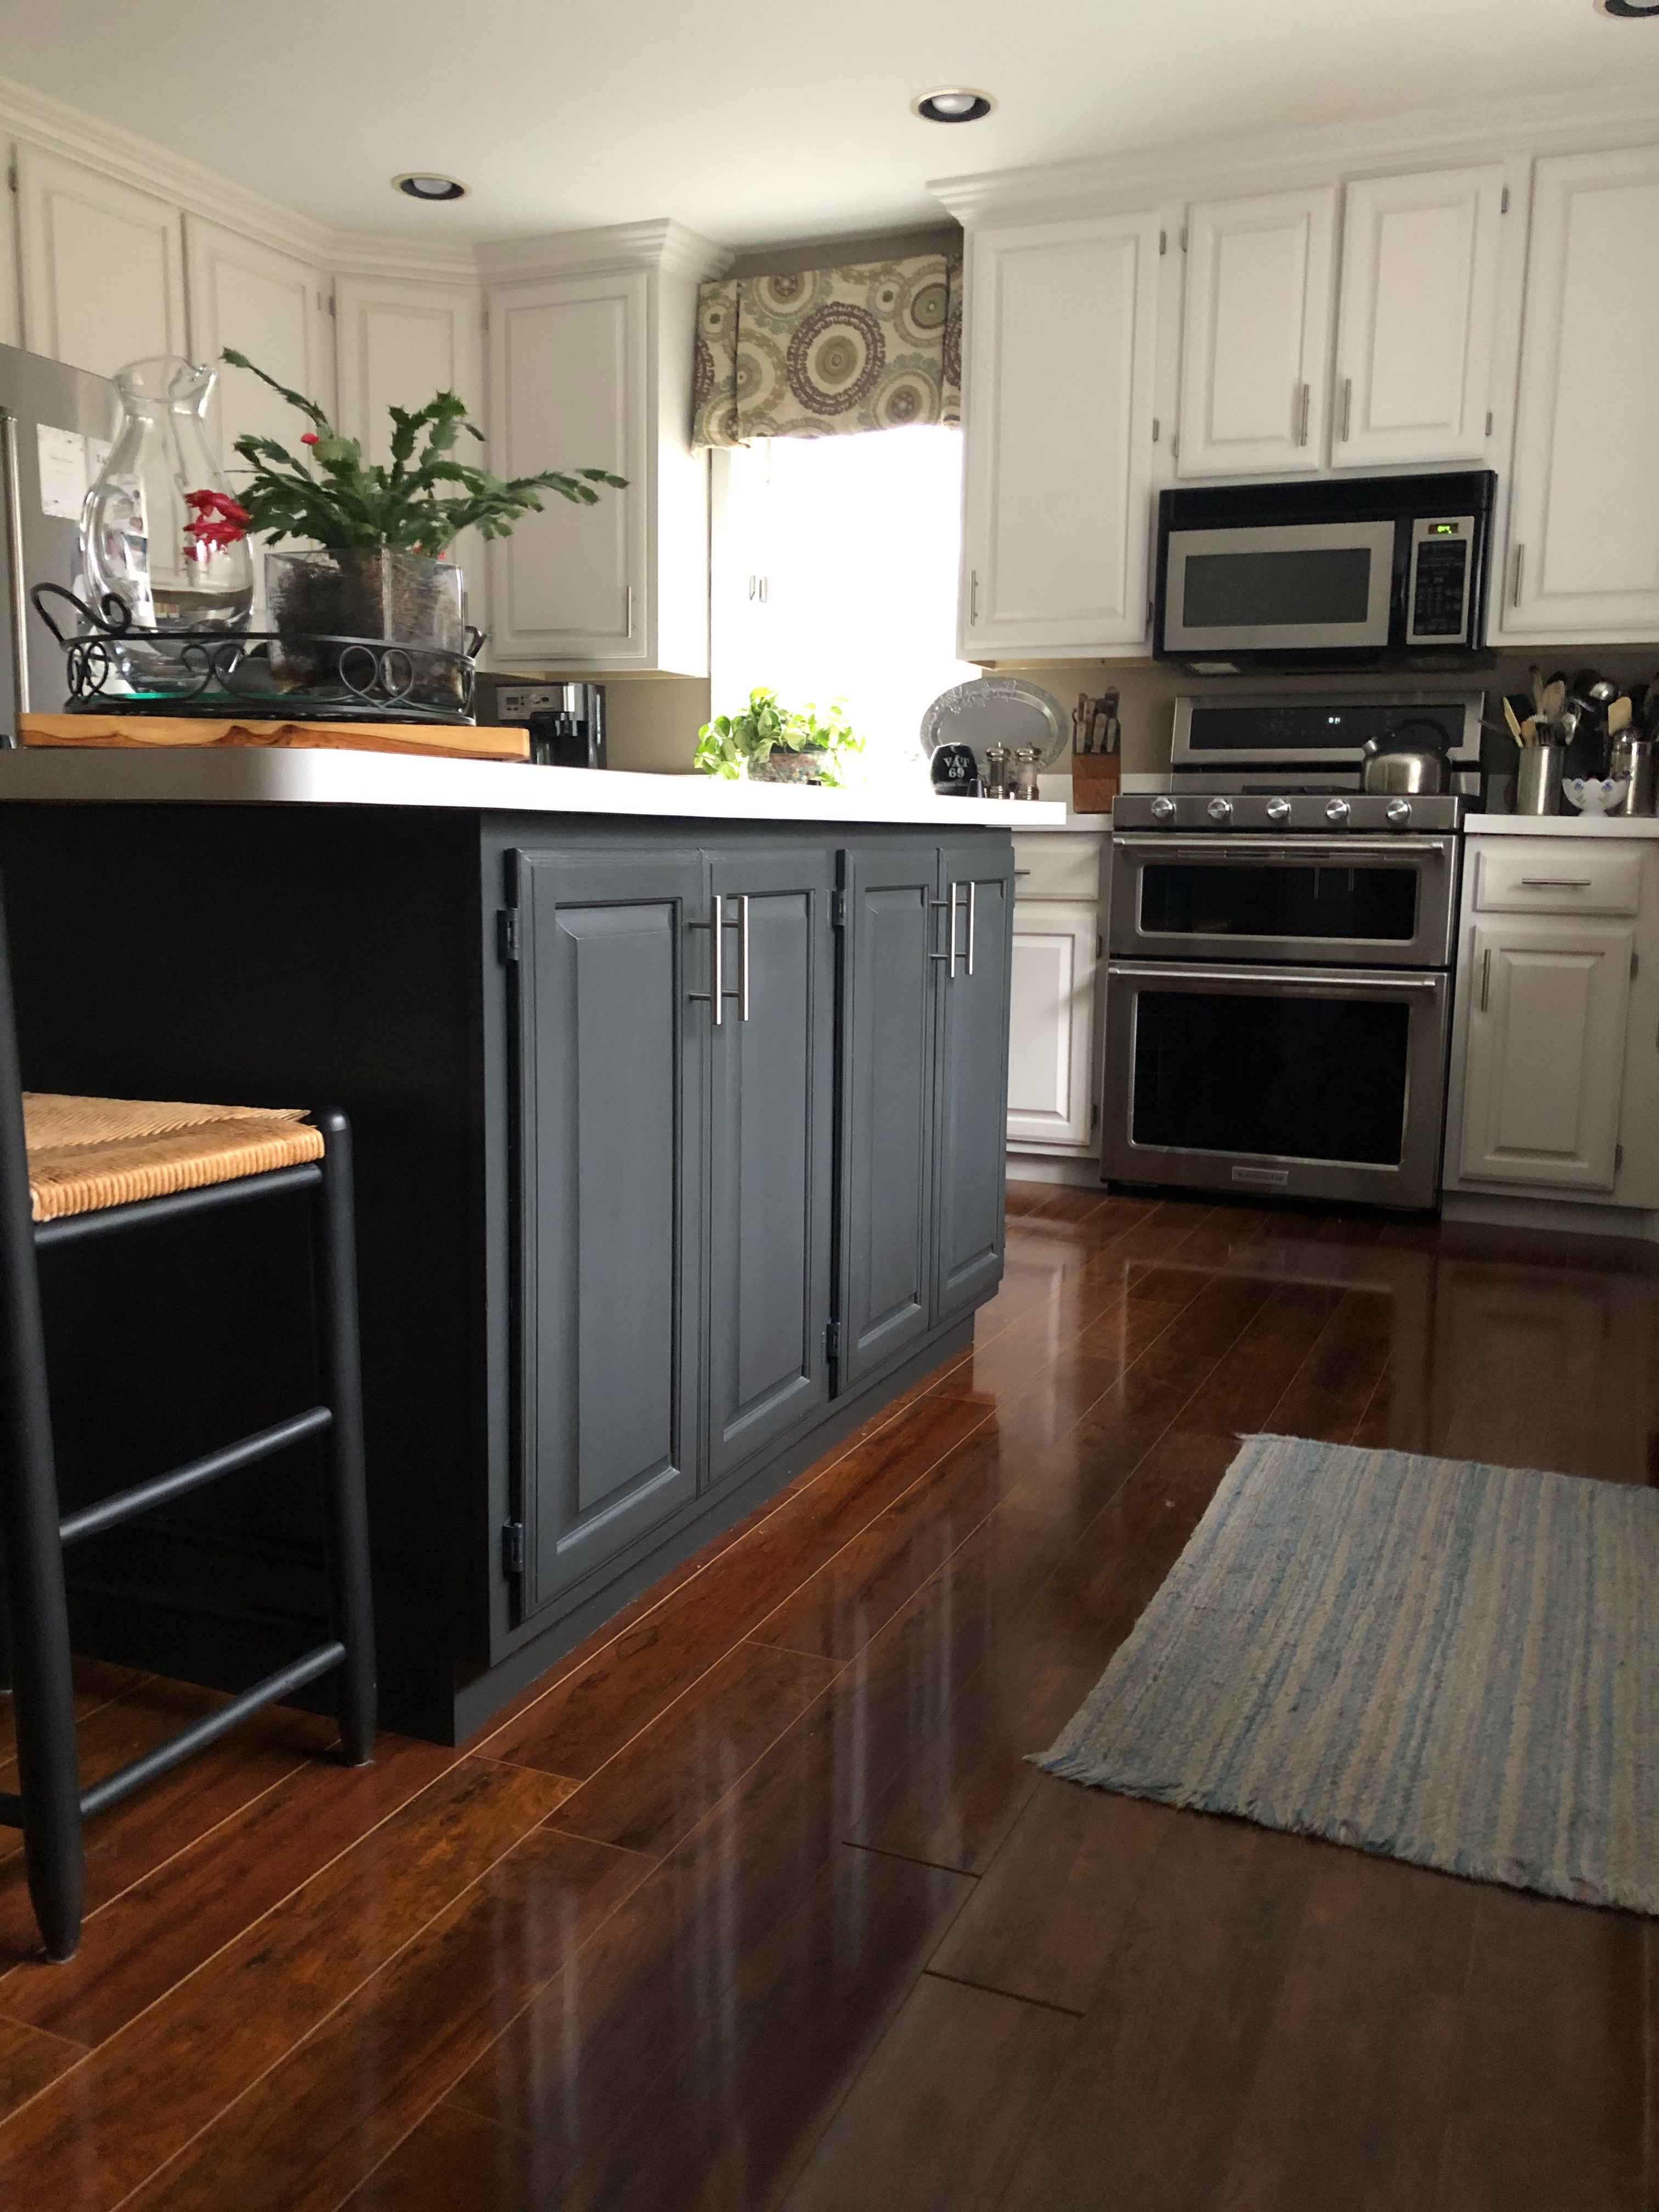 Diy Kitchen Update Painting, How To Paint Kitchen Cabinets That Are Not Real Wood